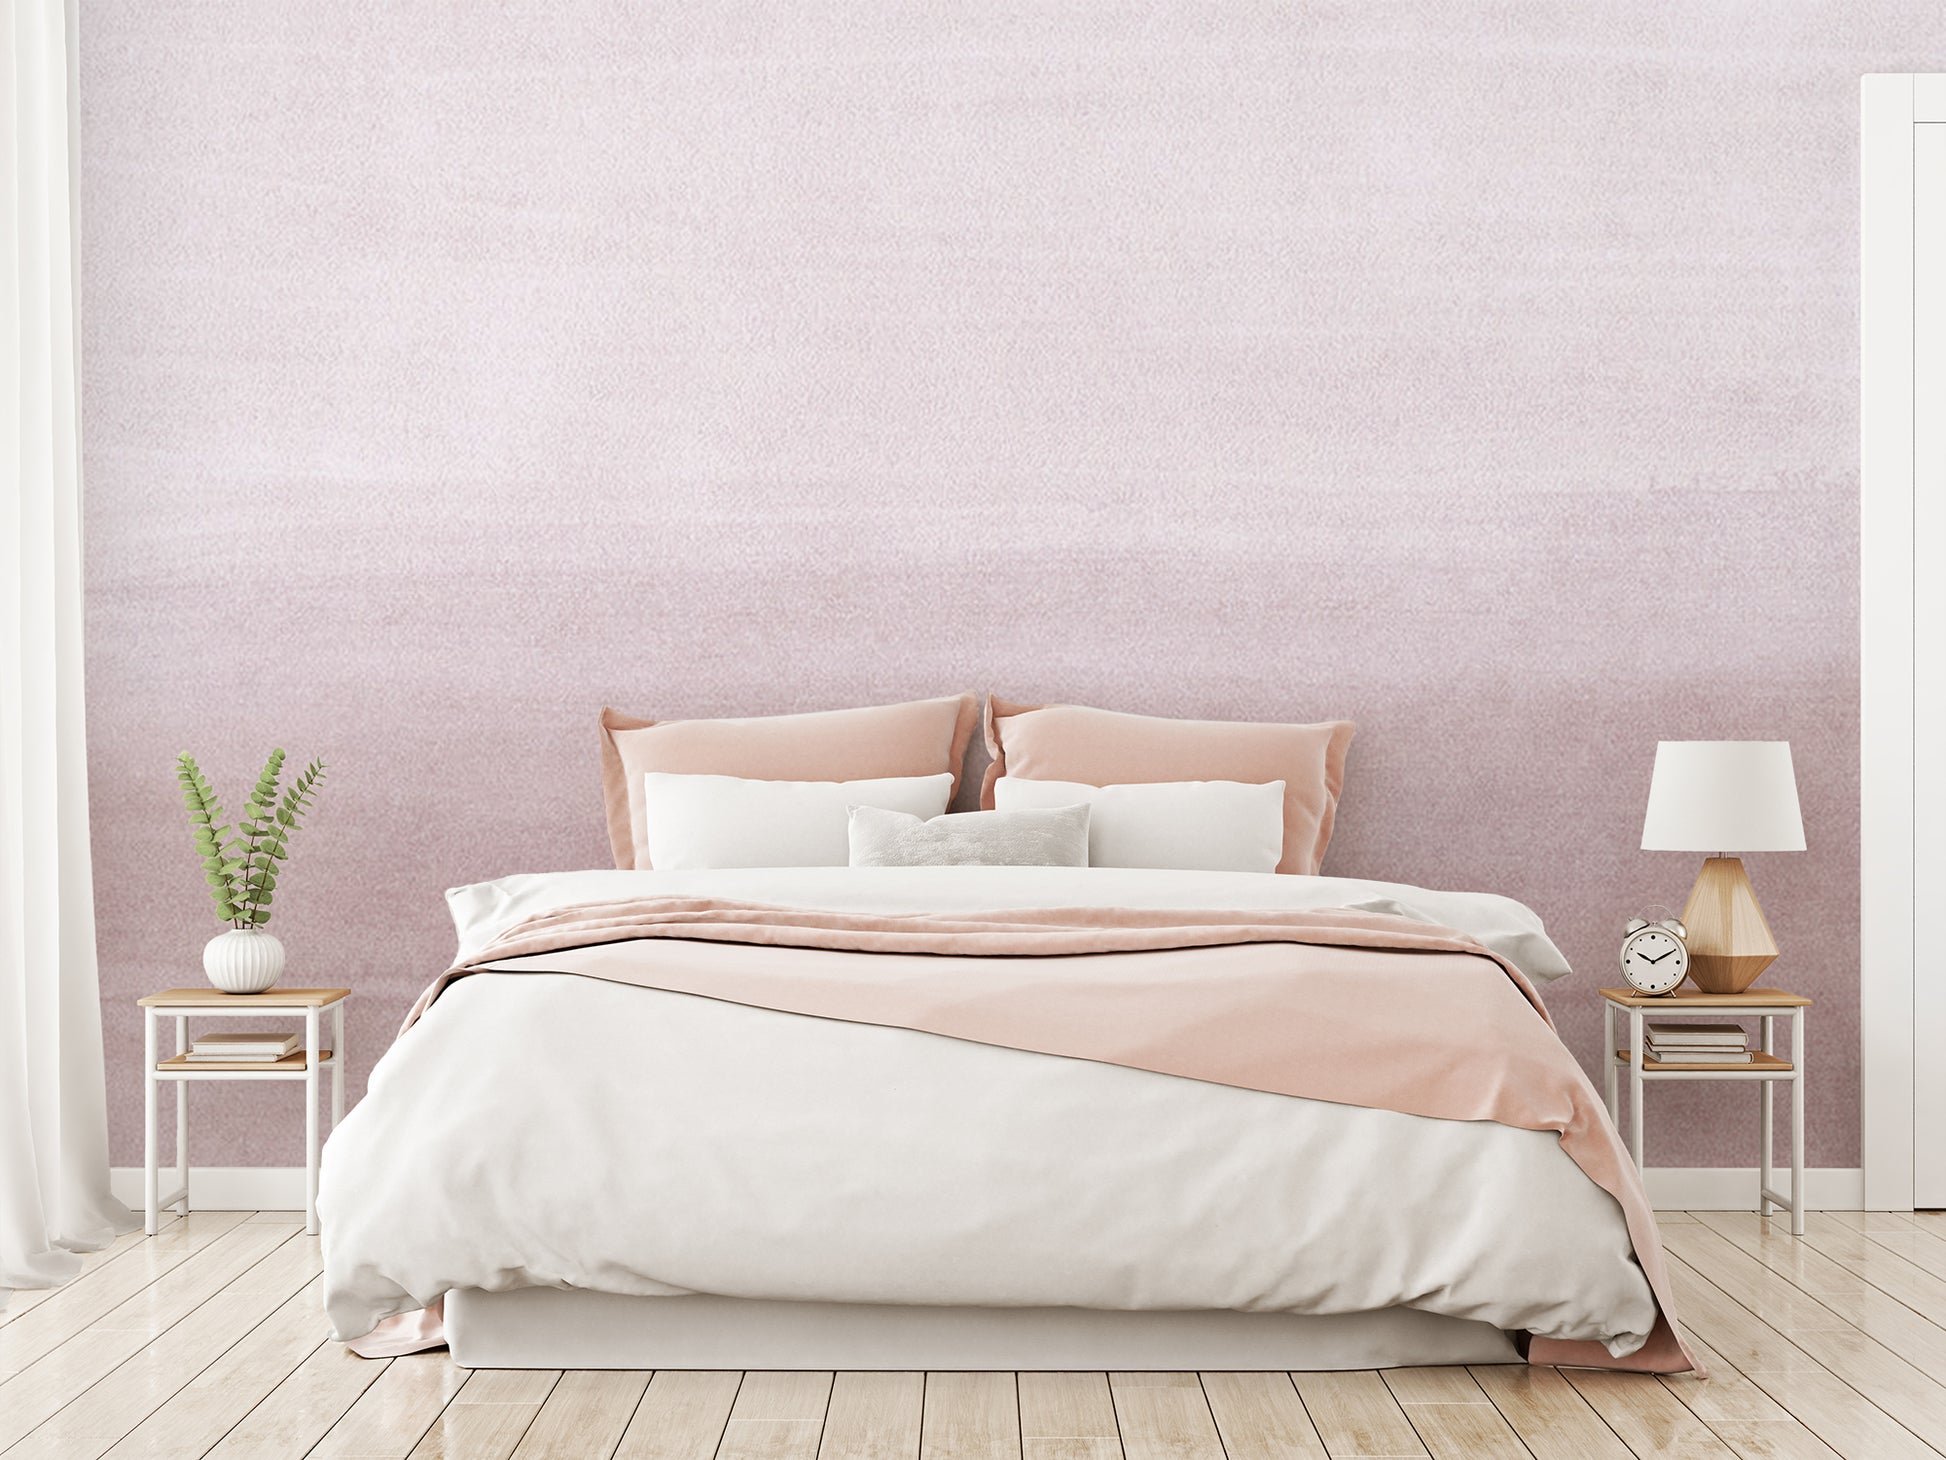 Clara Blush Ombre Watercolour Wallpaper in a Chic Pink Bedroom